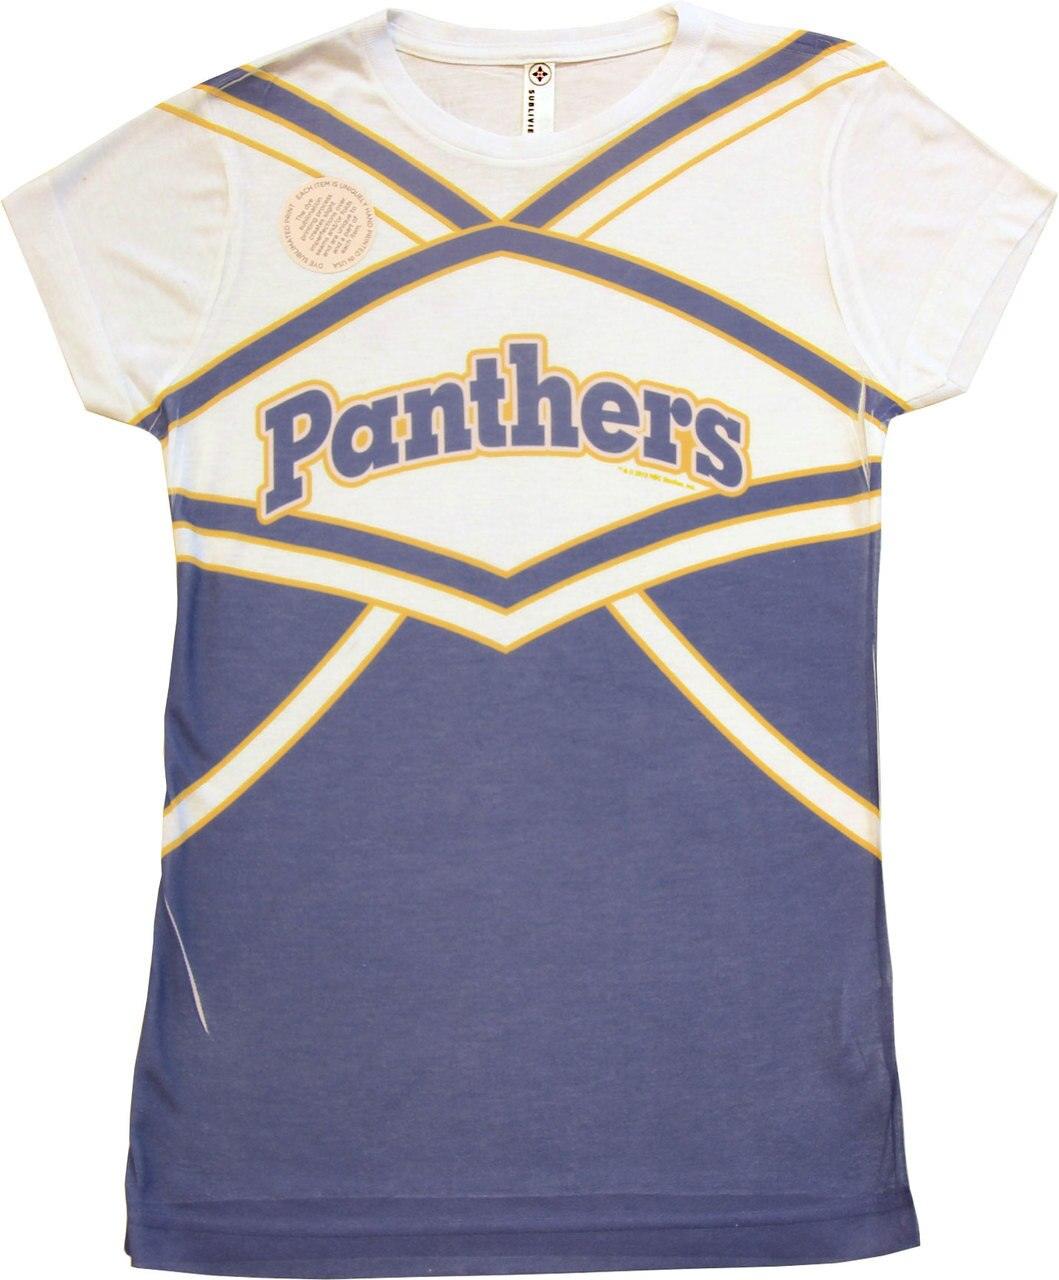 Dillon Panthers Cheer Uniform SUBLIMATED T-Shirt Tee-tvso